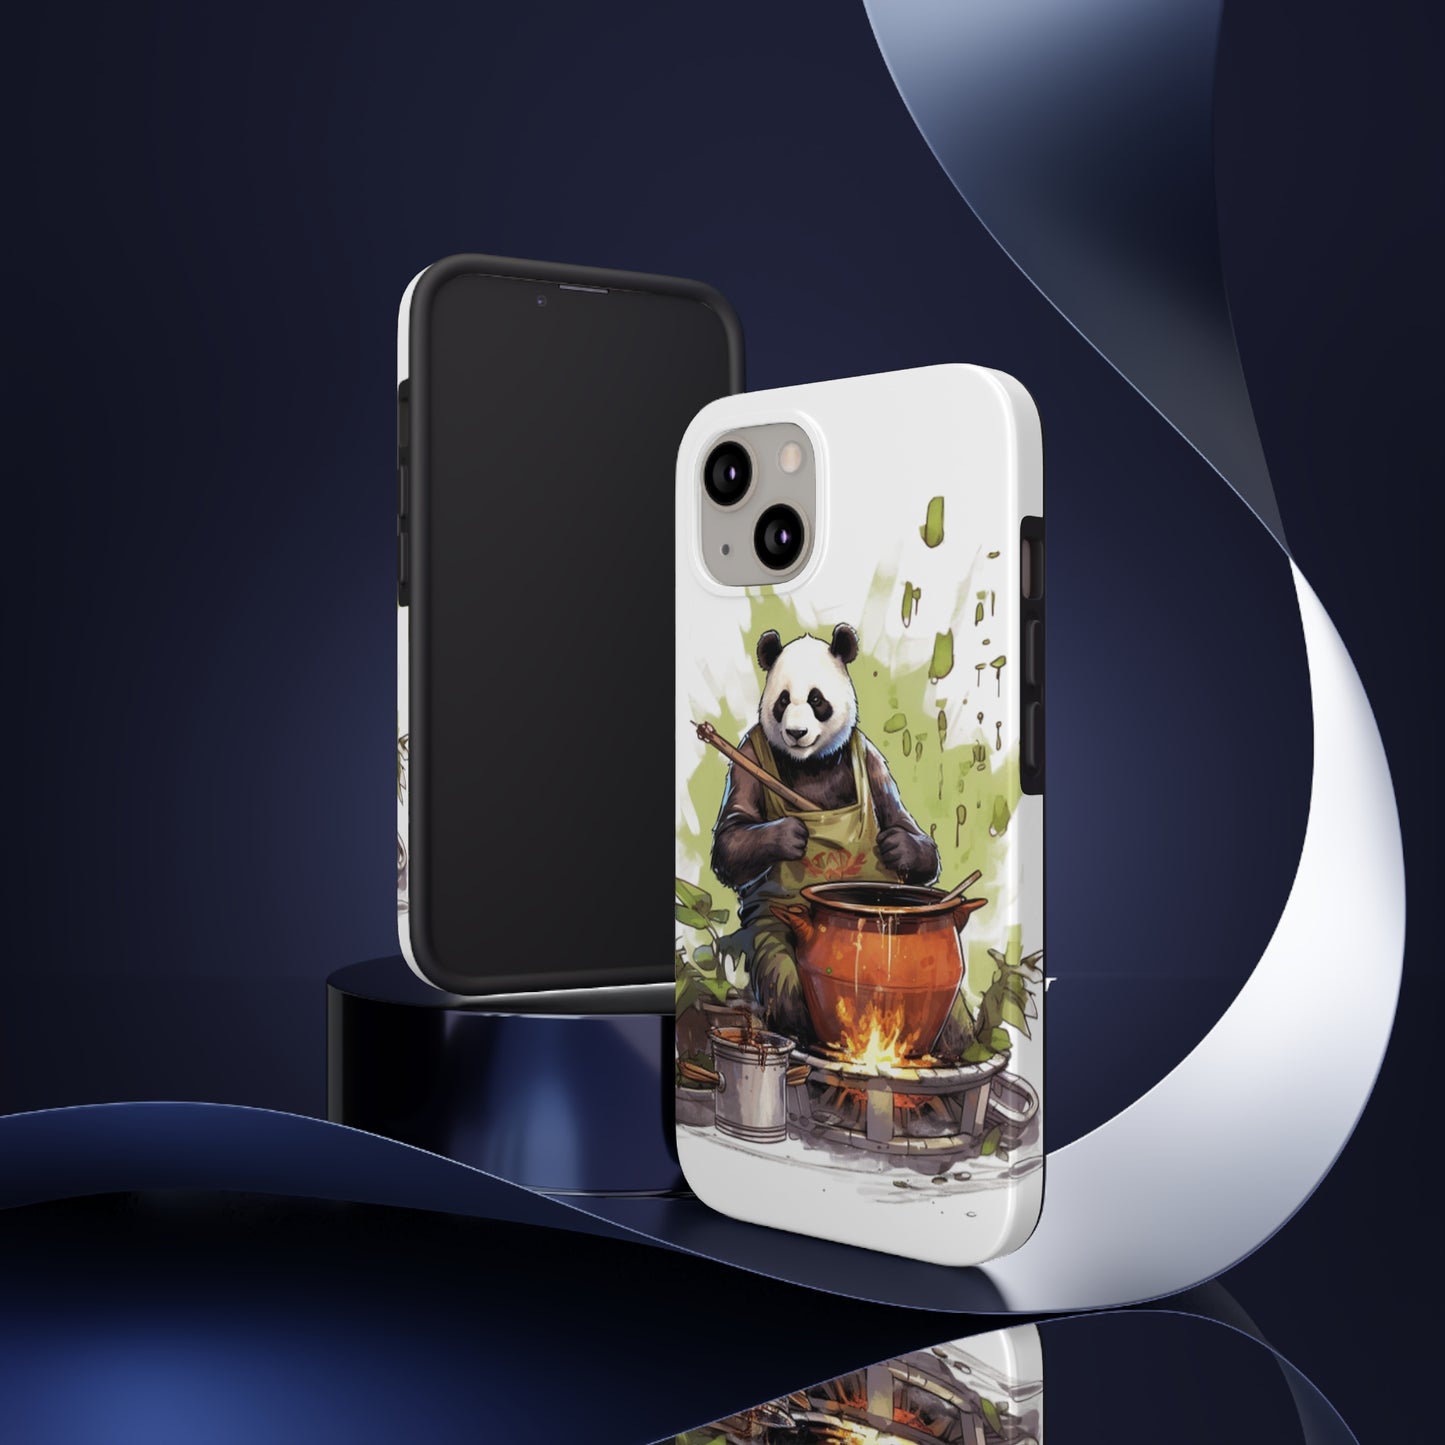 Panda Kitchen: Tough Phone Cases with a Culinary Genius Panda Cooking Up a Bamboo Gourmet Meal